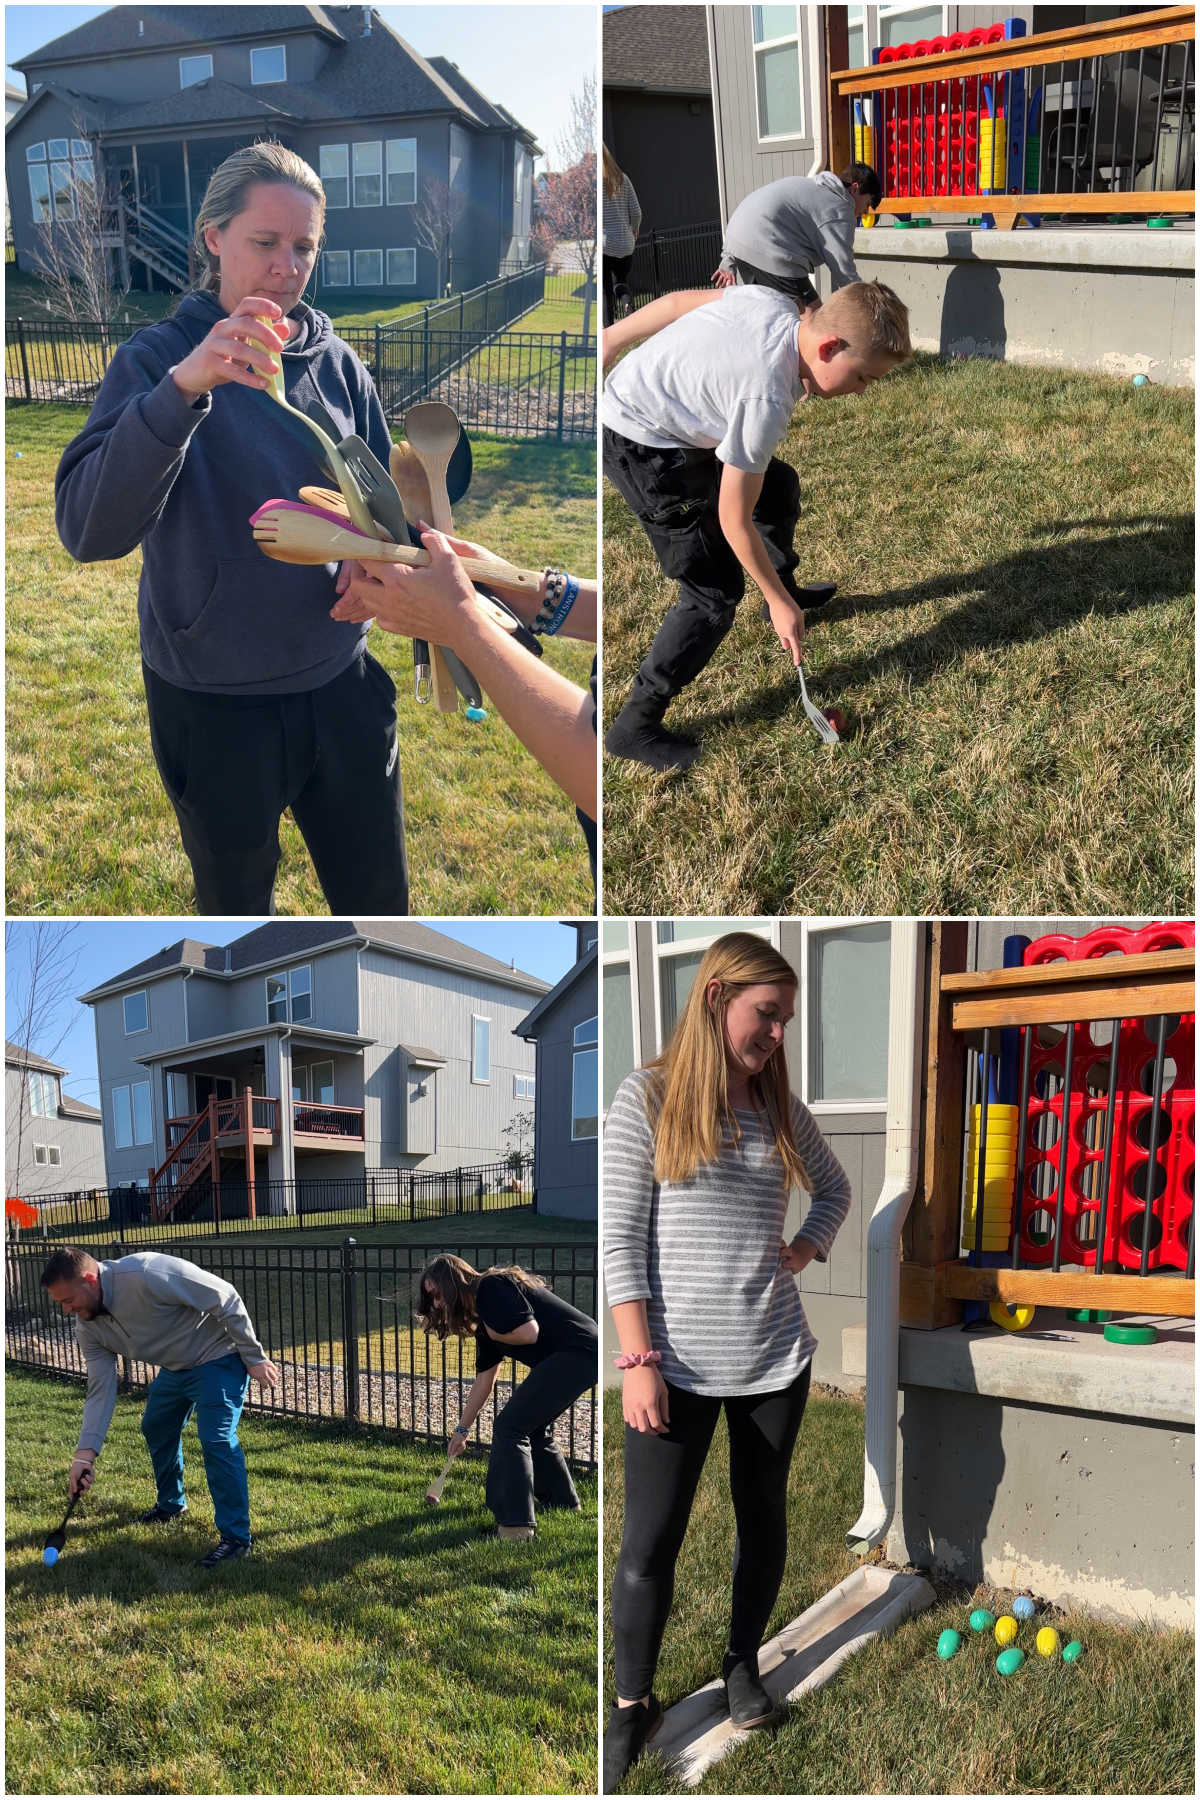 collage of four images showing people rolling eggs through the yard